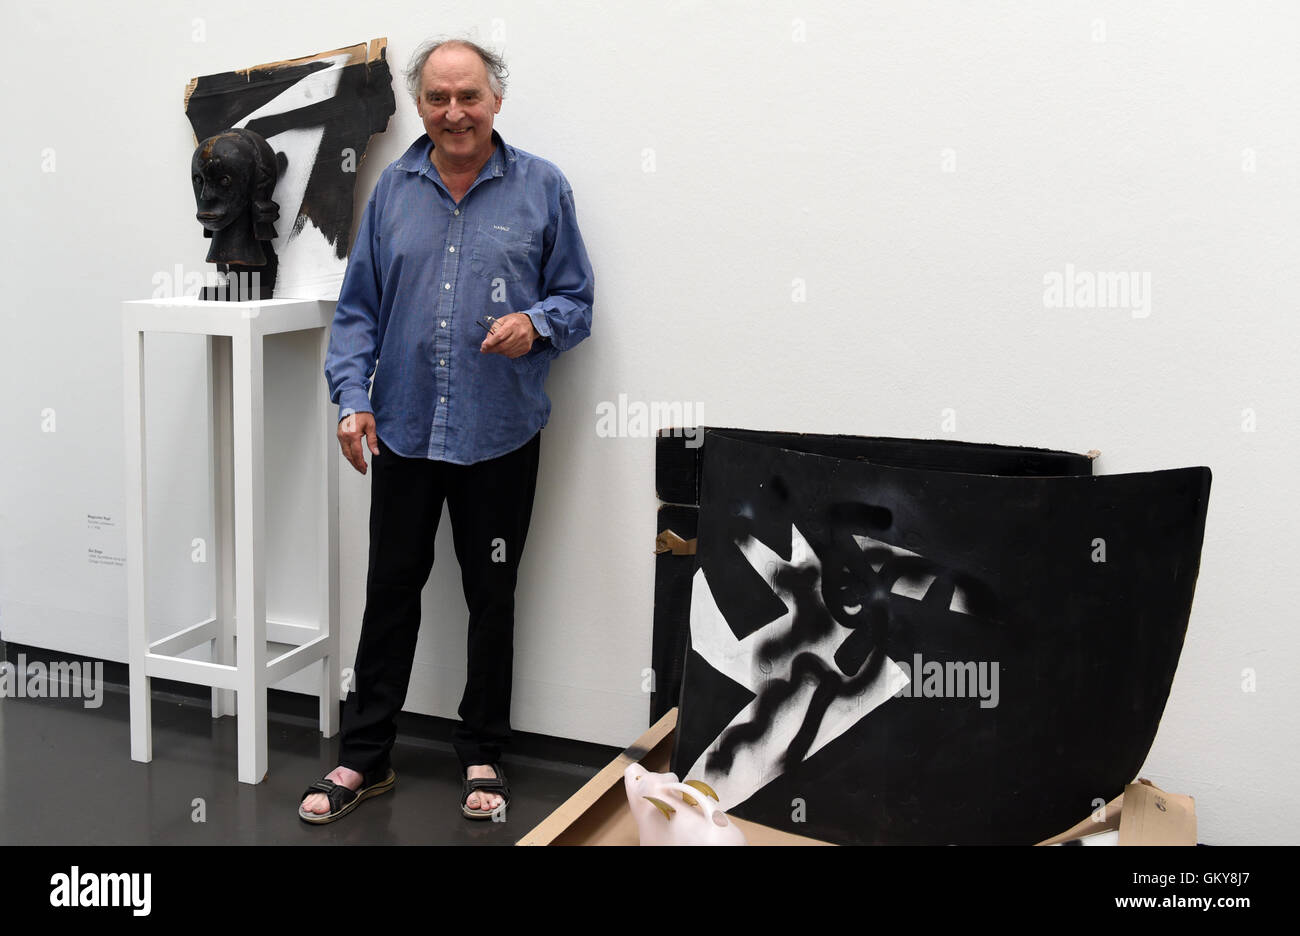 Duesseldorf, Germany. 24th Aug, 2016. Artist Harald Naegeli, who was widely known as 'the sprayer of Zurich' in the 1970s, stands next to some of his artworks in his atelier, that was moved to the museum for the exhibition, during the press tour of his exhibition 'Harald Naegeli - Der Prozess' at the Stadtmuseum in Duesseldorf, Germany, 24 August 2016. The exhibition is open at the Stadtmuseum in Duesseldorf from 26 August 2016 to 1 January 2017. Photo: Horst Ossinger/dpa/Alamy Live News Stock Photo